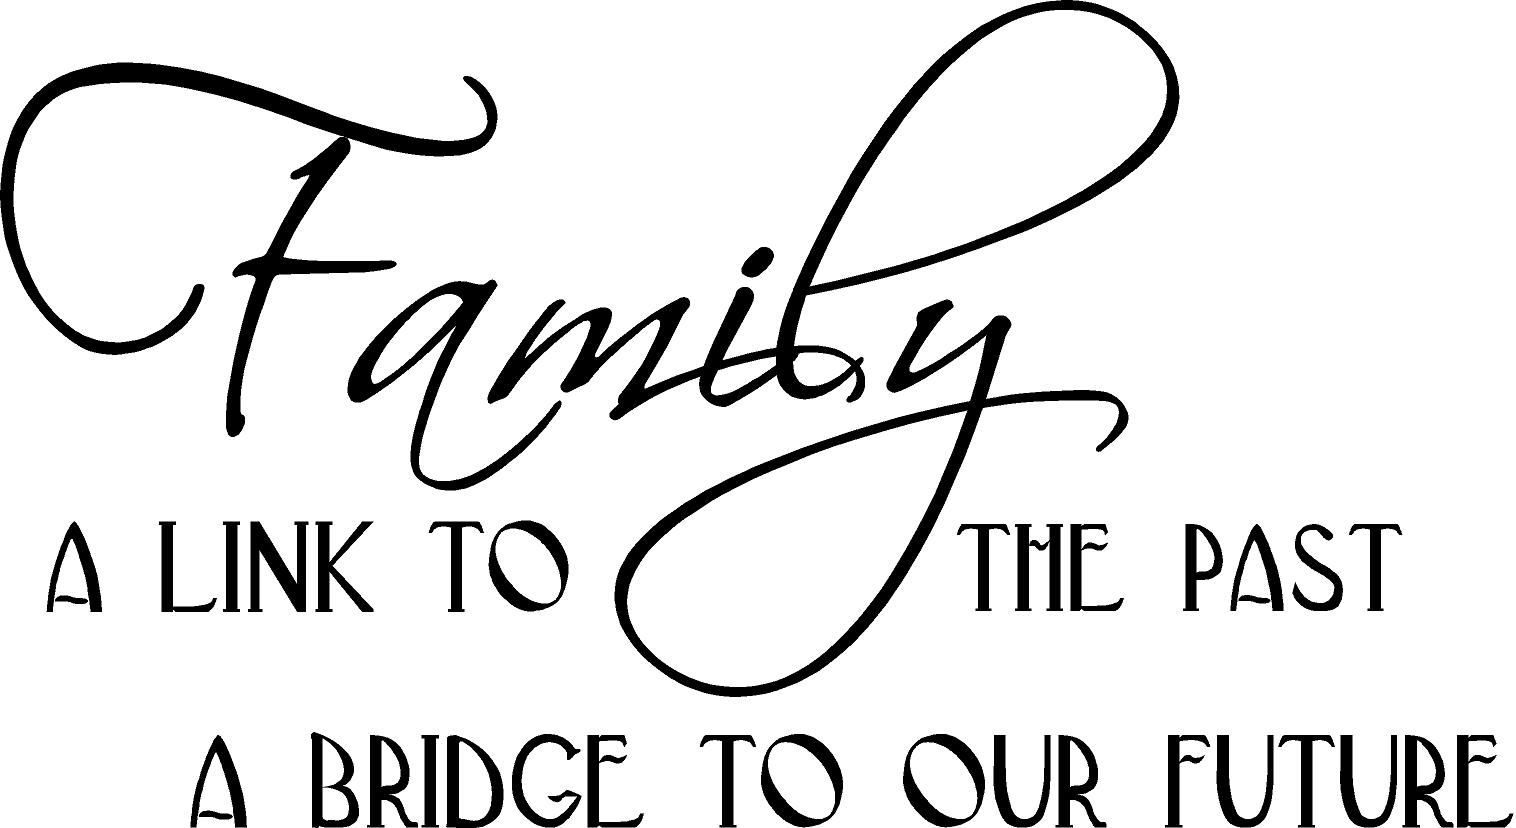 Sayings Quotes And Lettering For Your Walls About Family And Friends